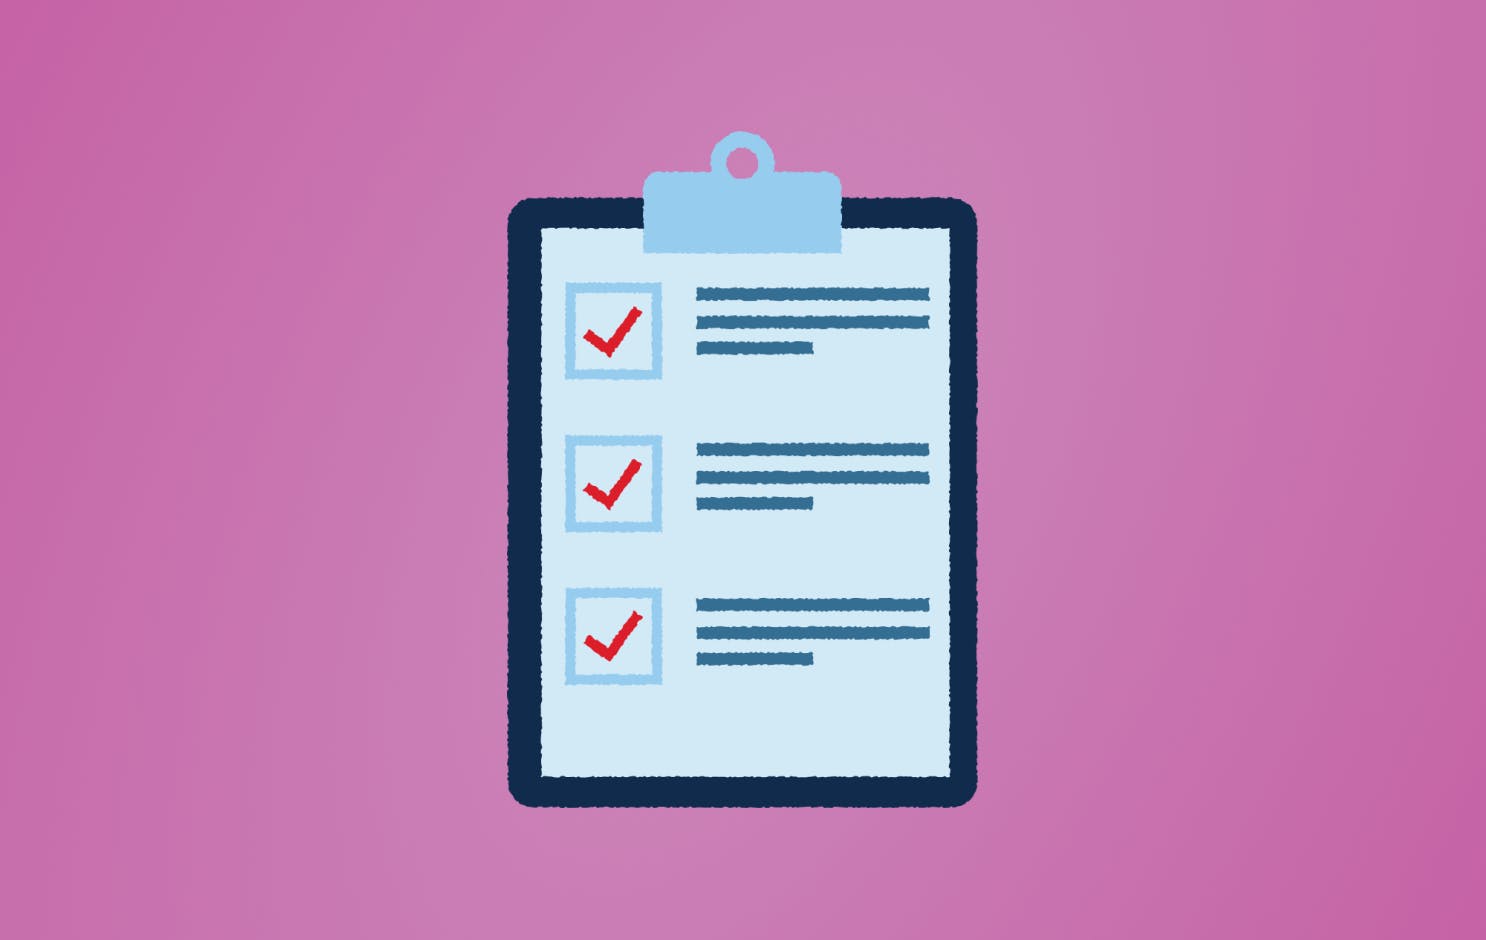 /the-comprehensive-code-review-checklist feature image